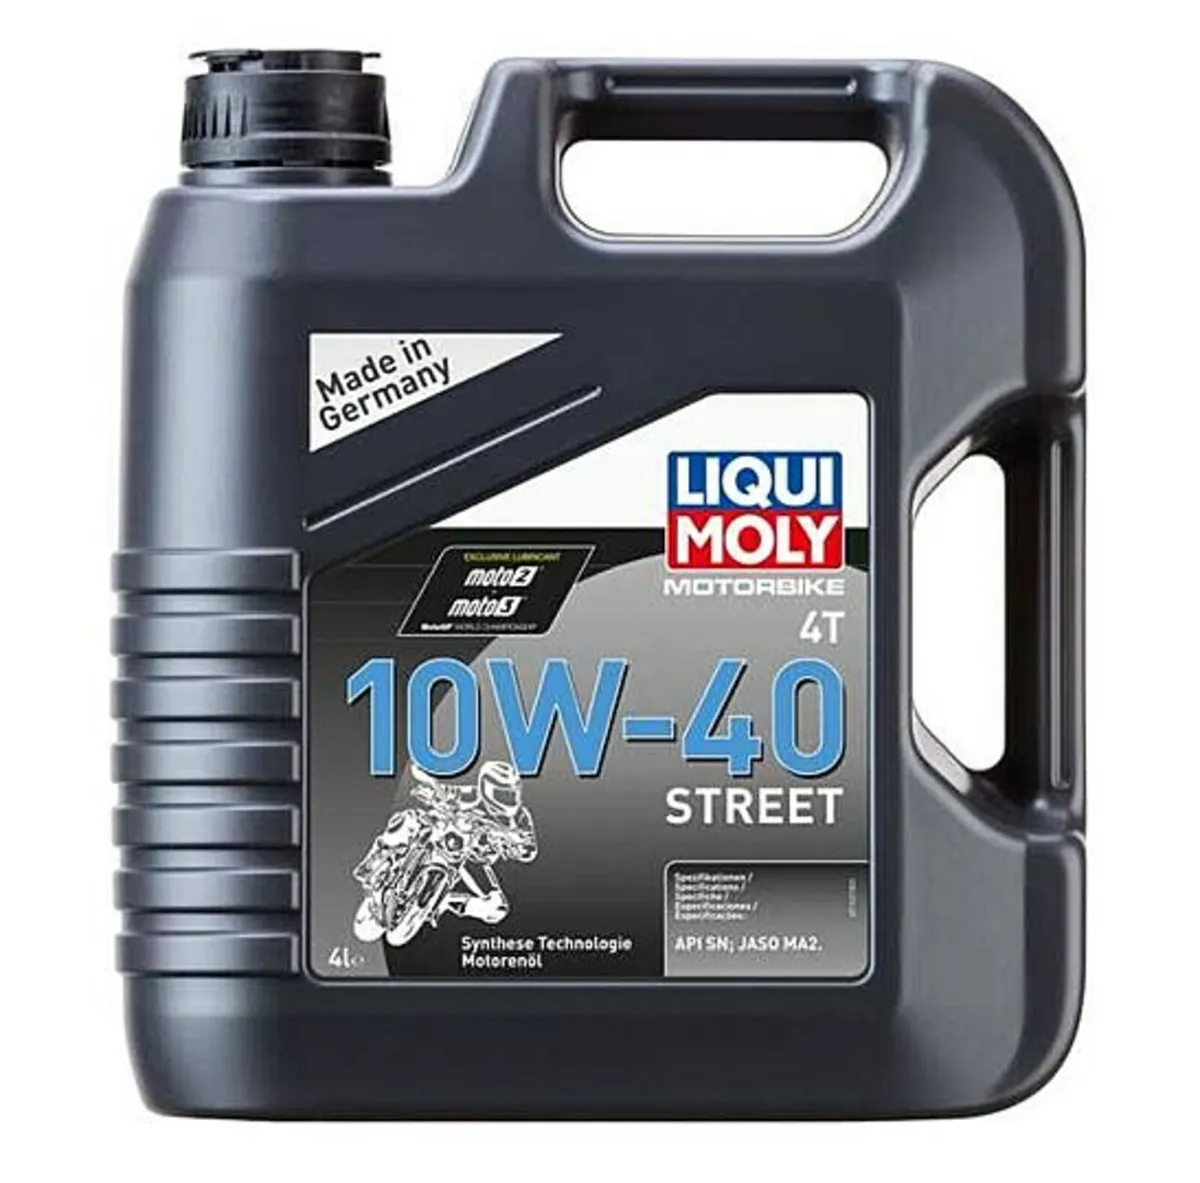 Liqui Moly Motorcycle engine oil